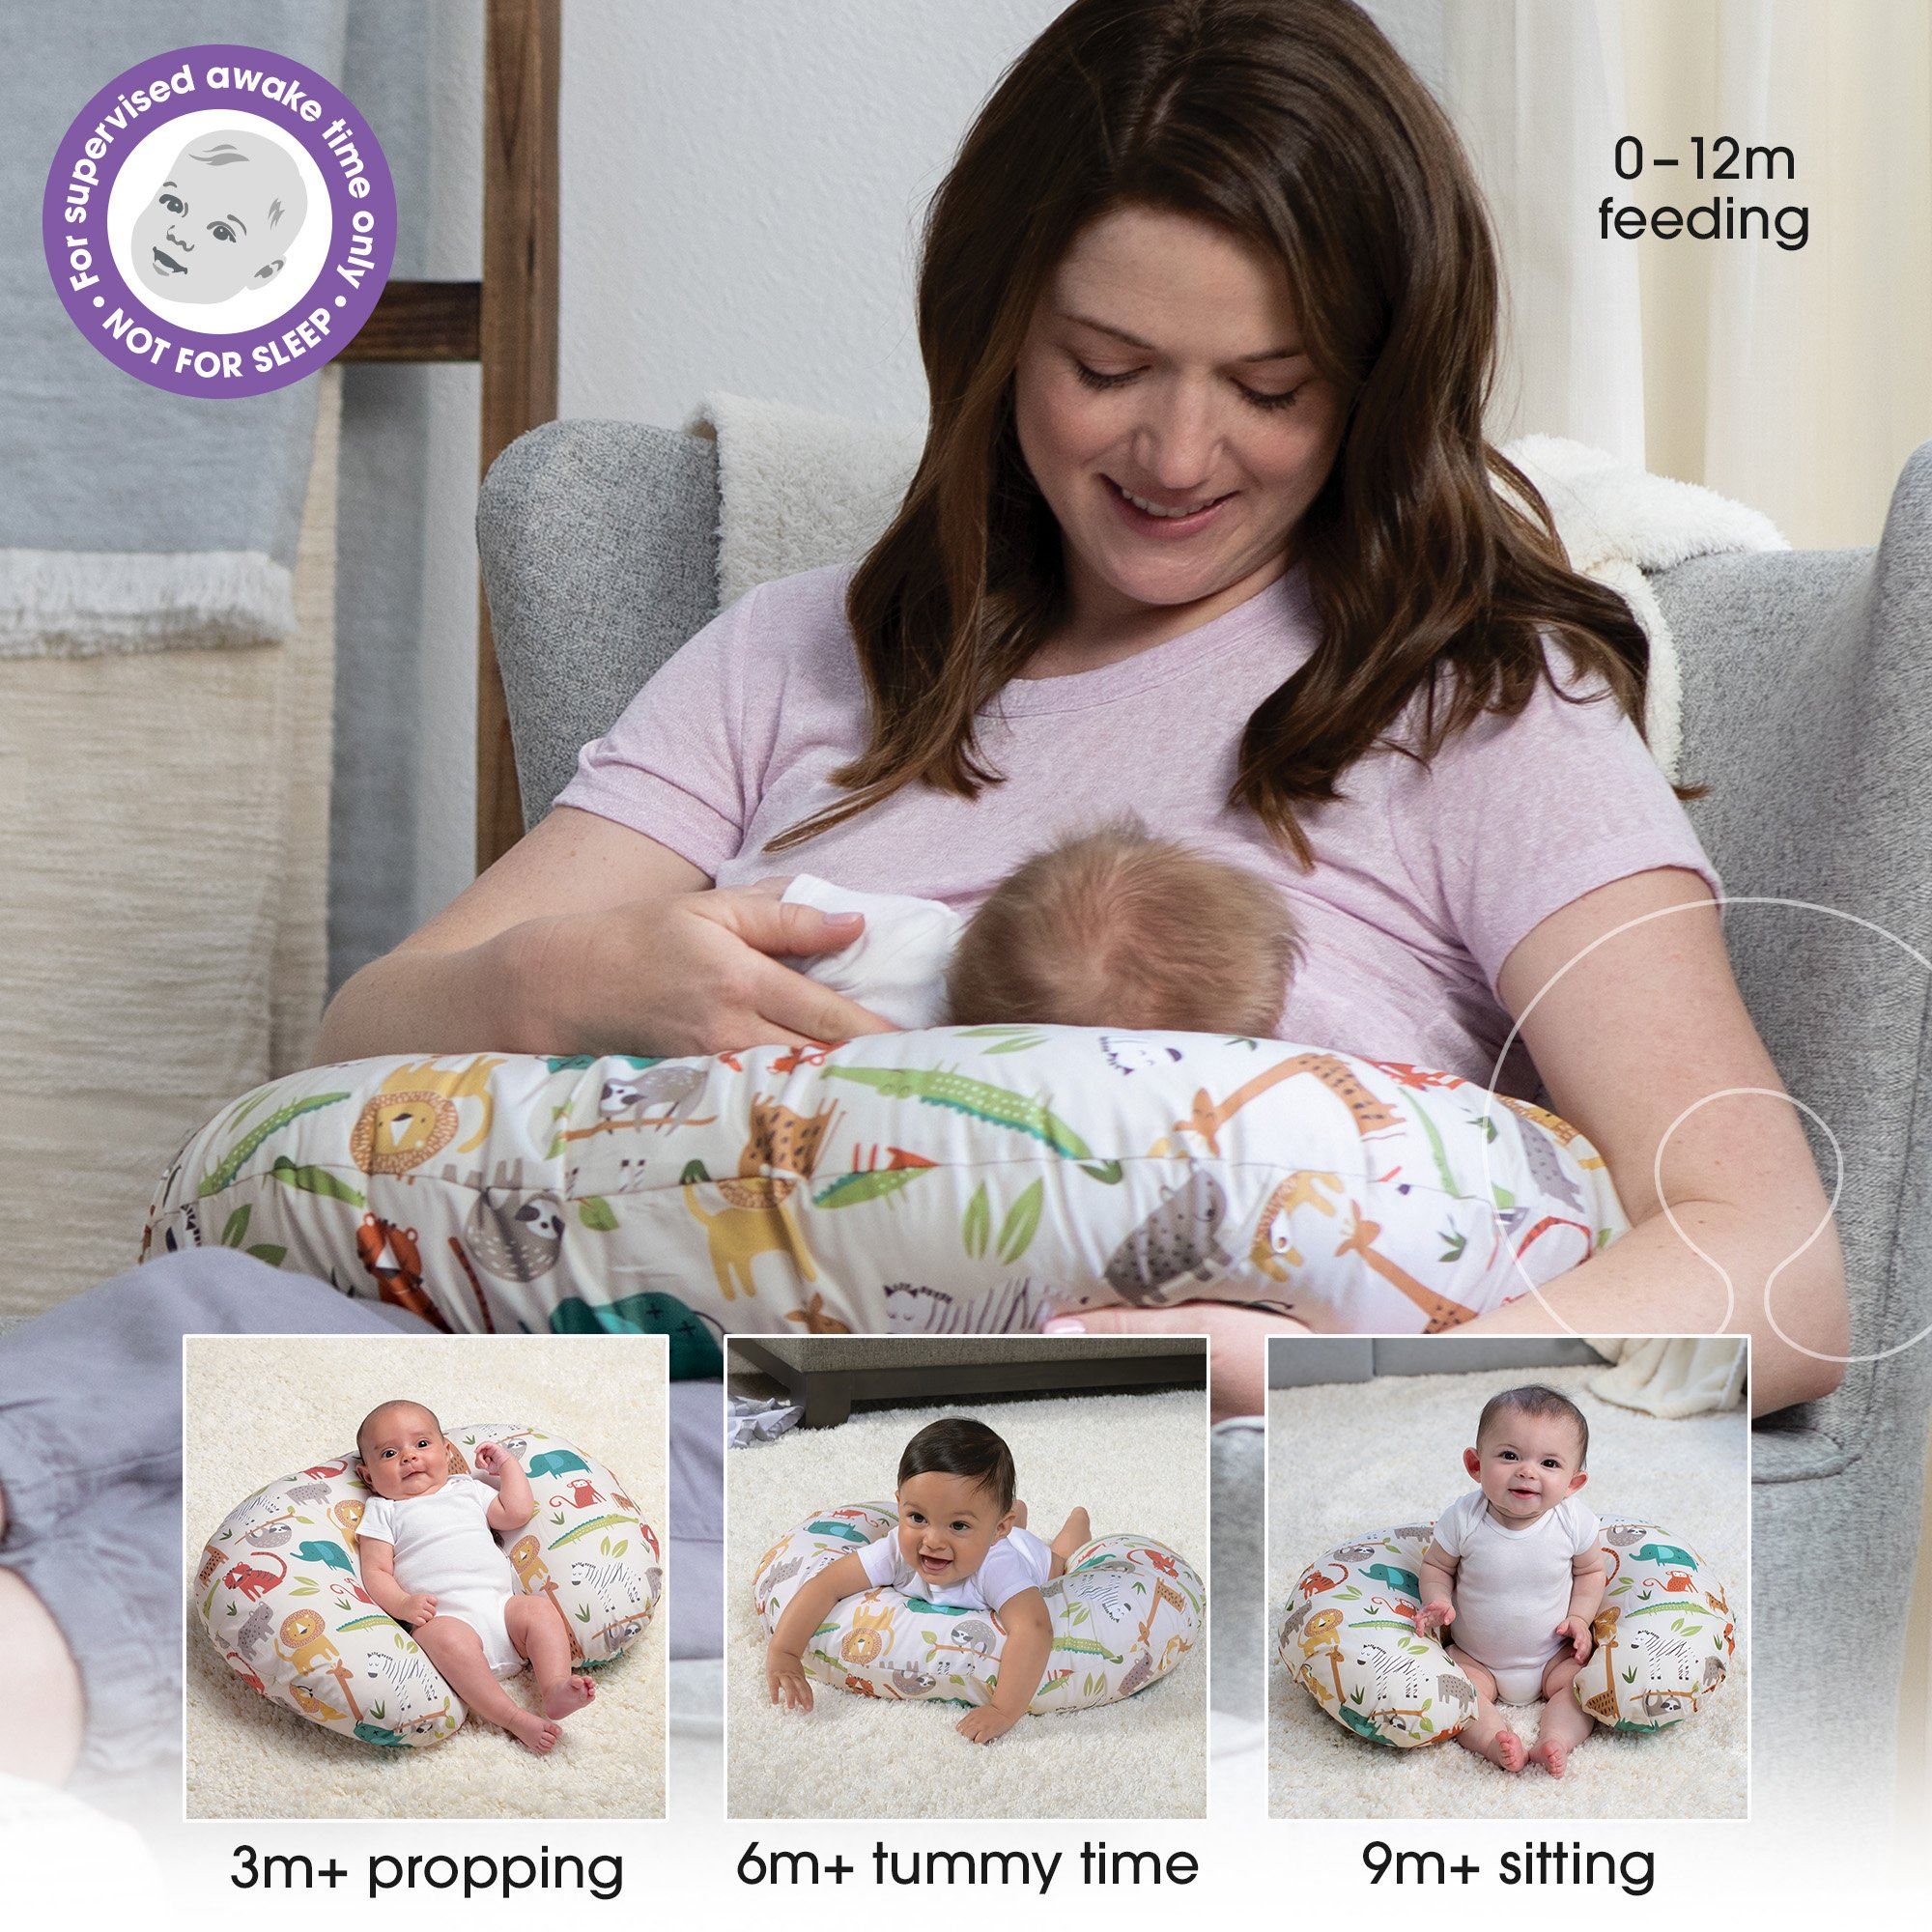 Award-Winning Nursing Pillow with Washable Cover | bbhugme